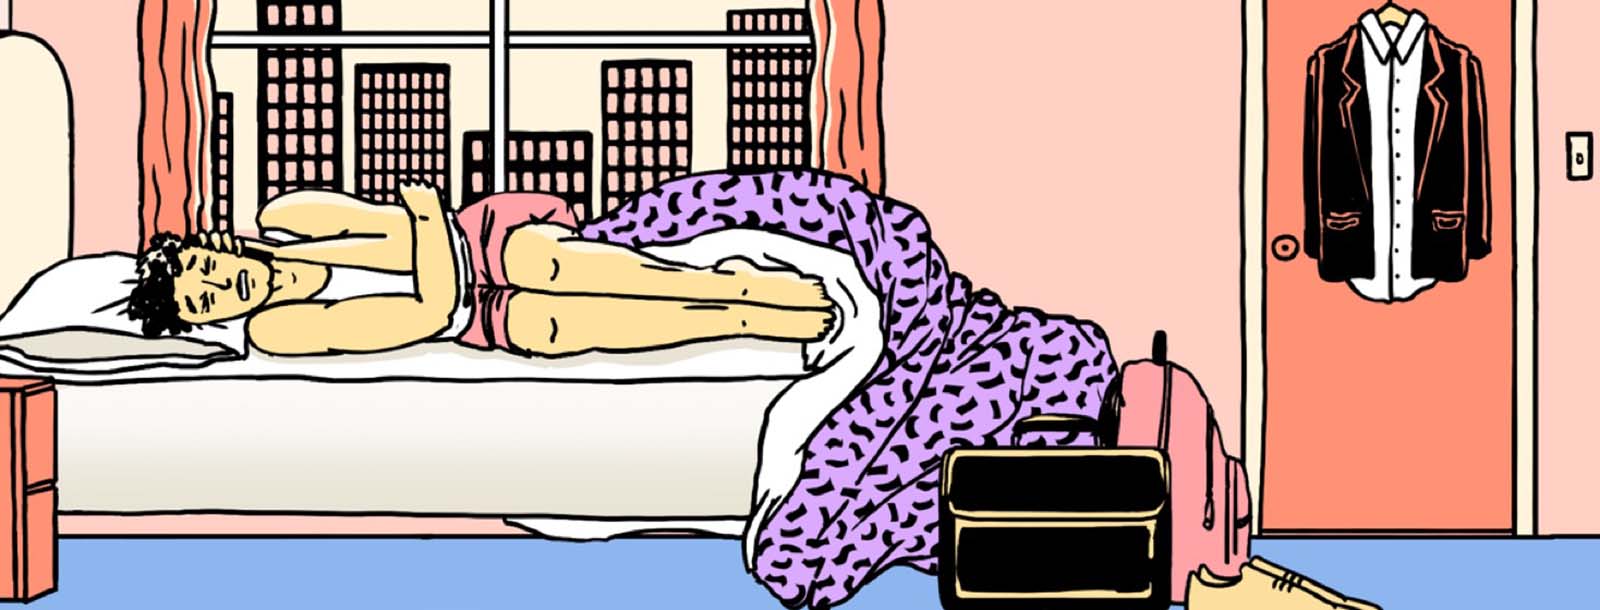 A person folds over in pain on their bed during the day on the phone